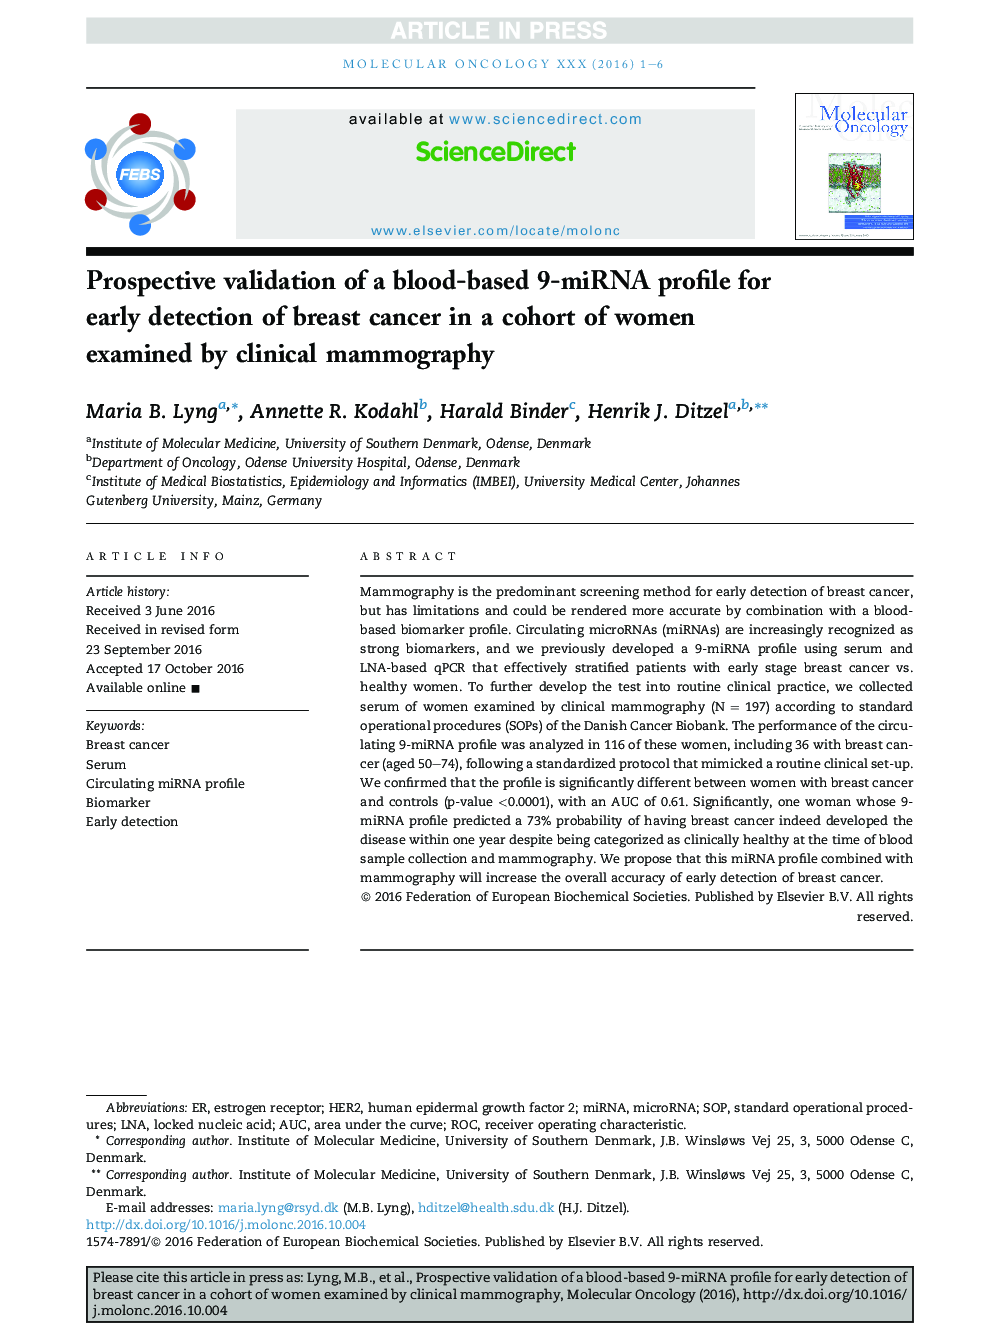 Prospective validation of a blood-based 9-miRNA profile for early detection of breast cancer in a cohort of women examined by clinical mammography